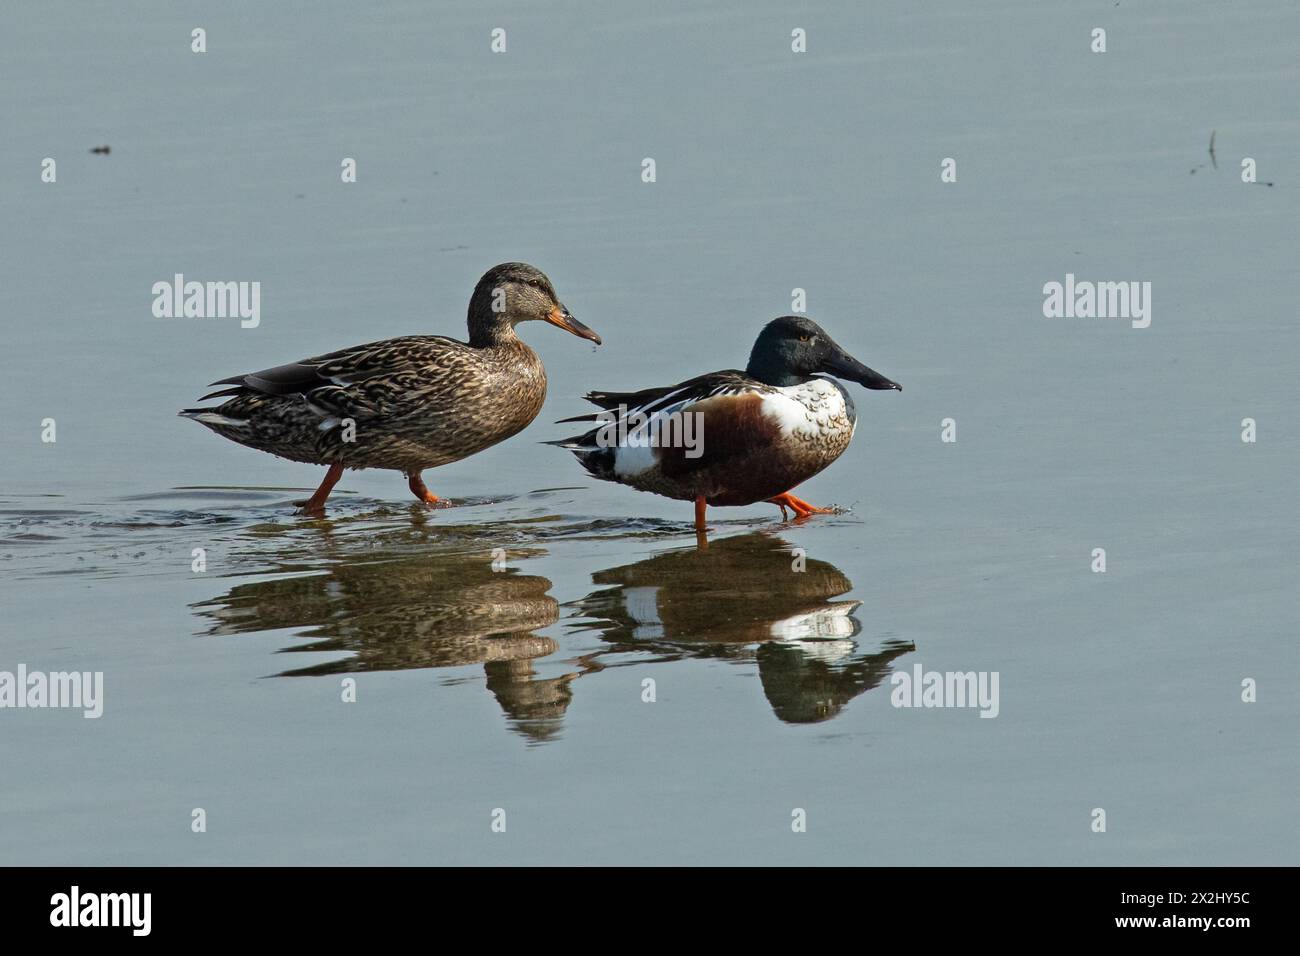 Shoveler female and male with mirror image standing side by side in water looking right Stock Photo